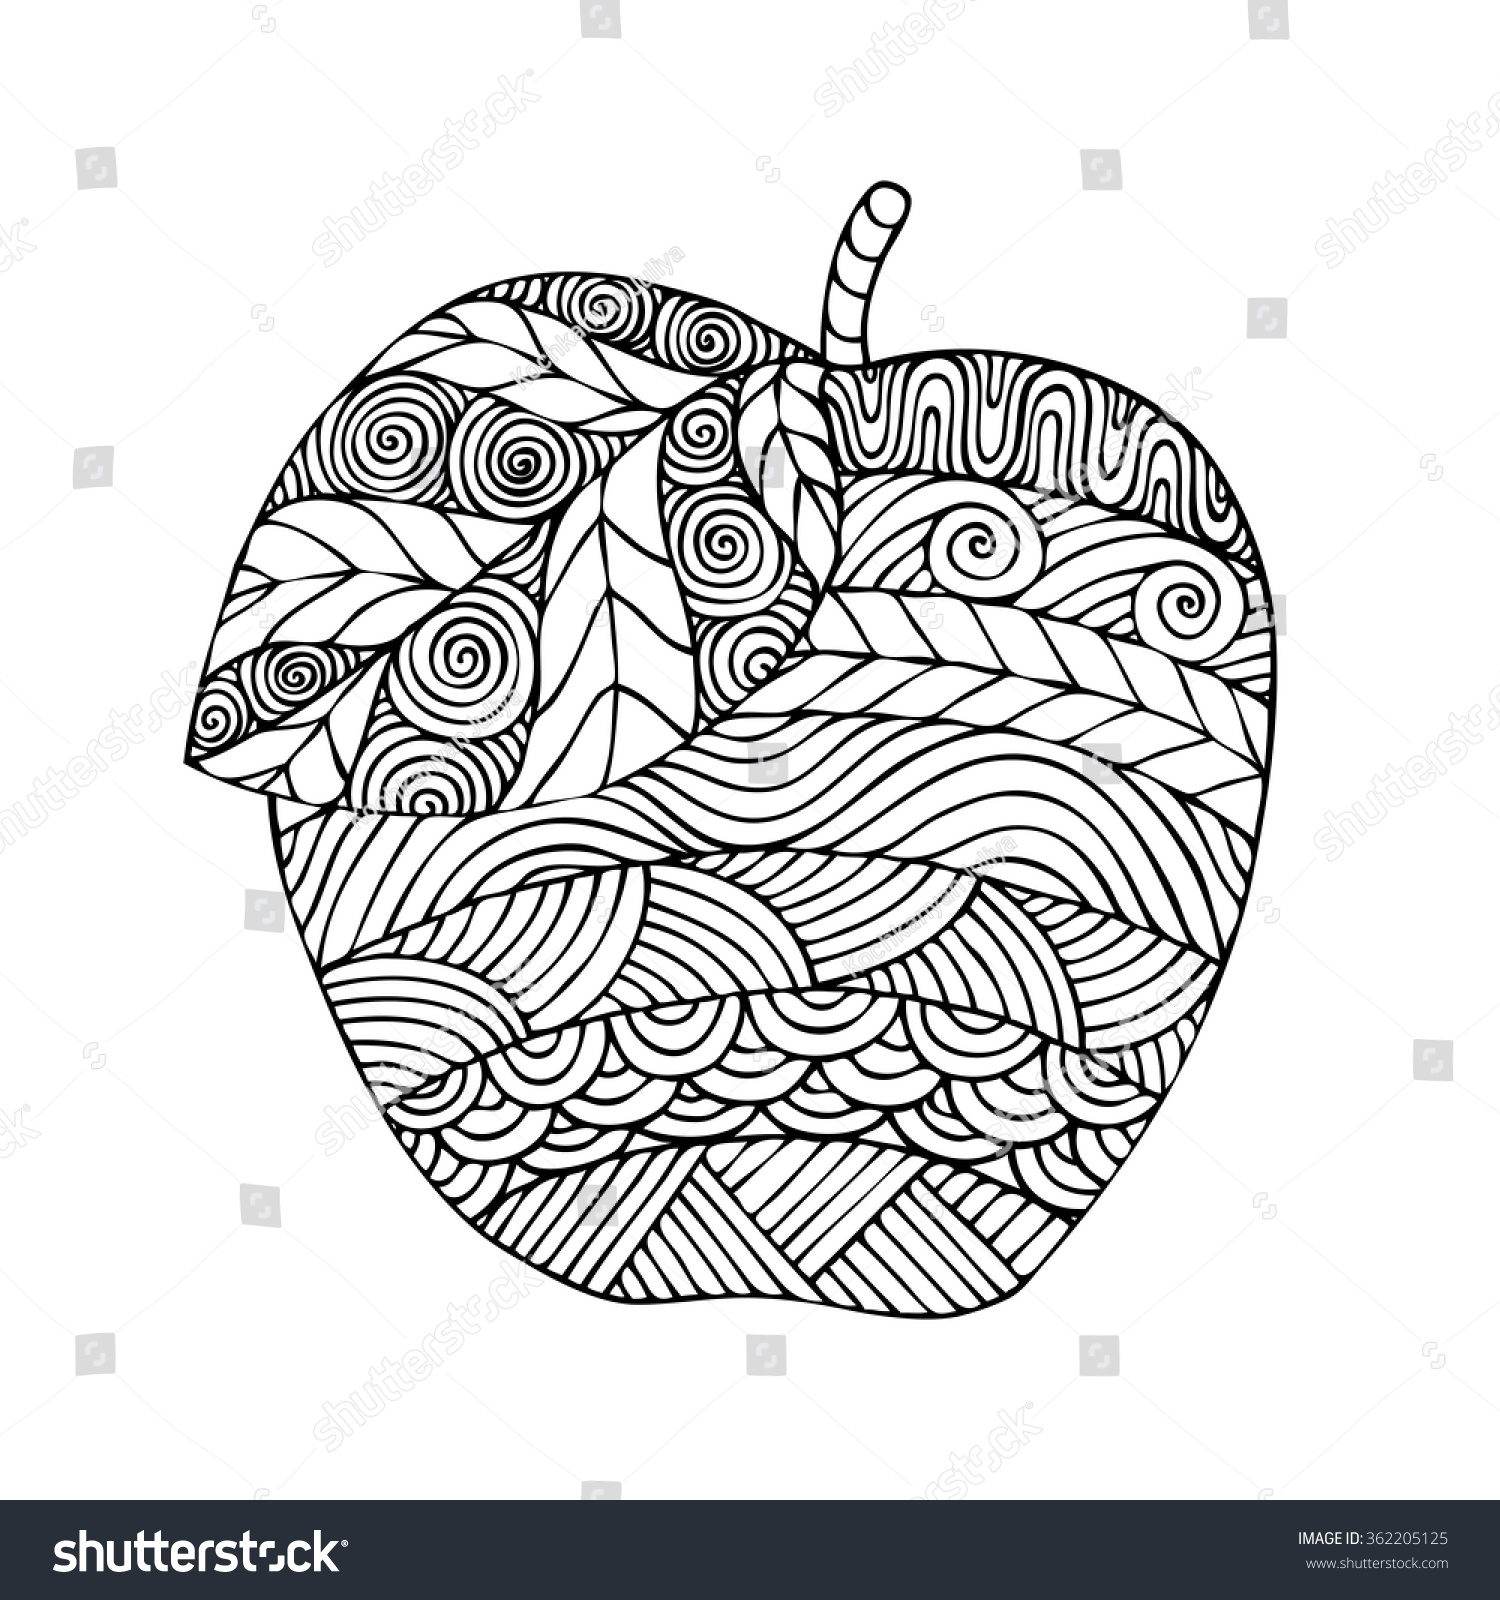 Download Adult Coloring Book Page Design Image Stock Vector ...